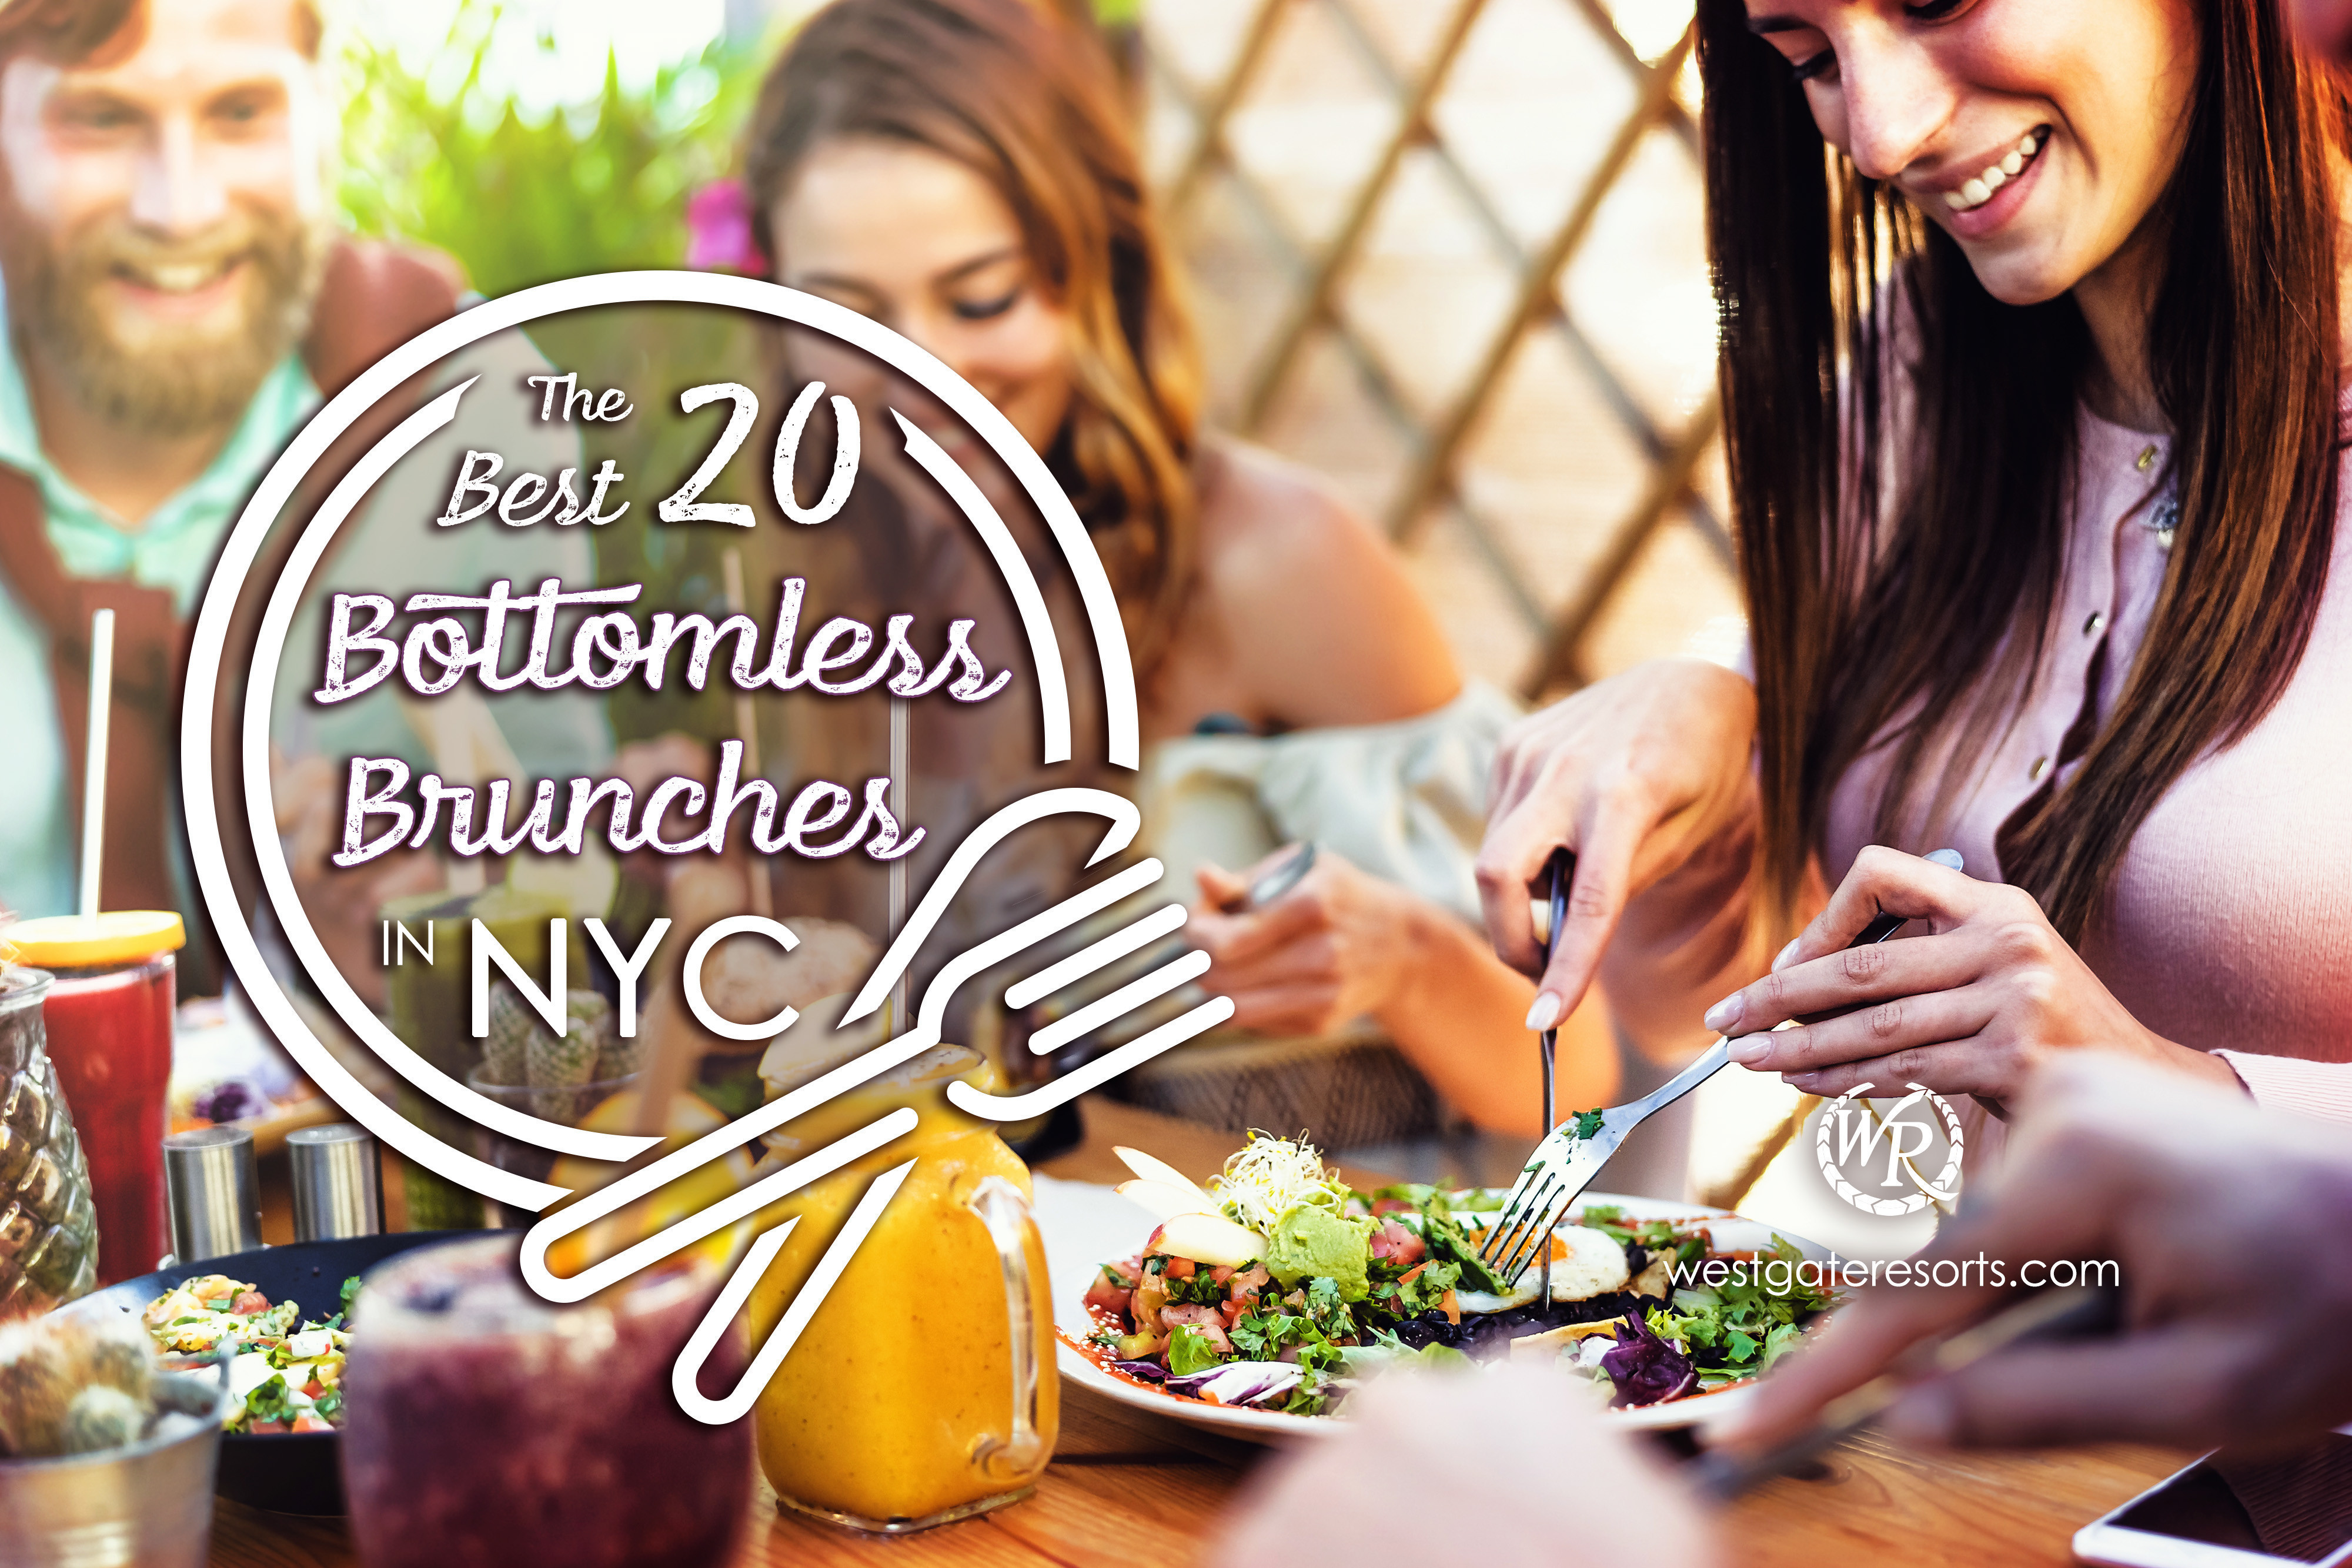 The 20 Best Bottomless Brunches NYC Locals Are Crazy About!